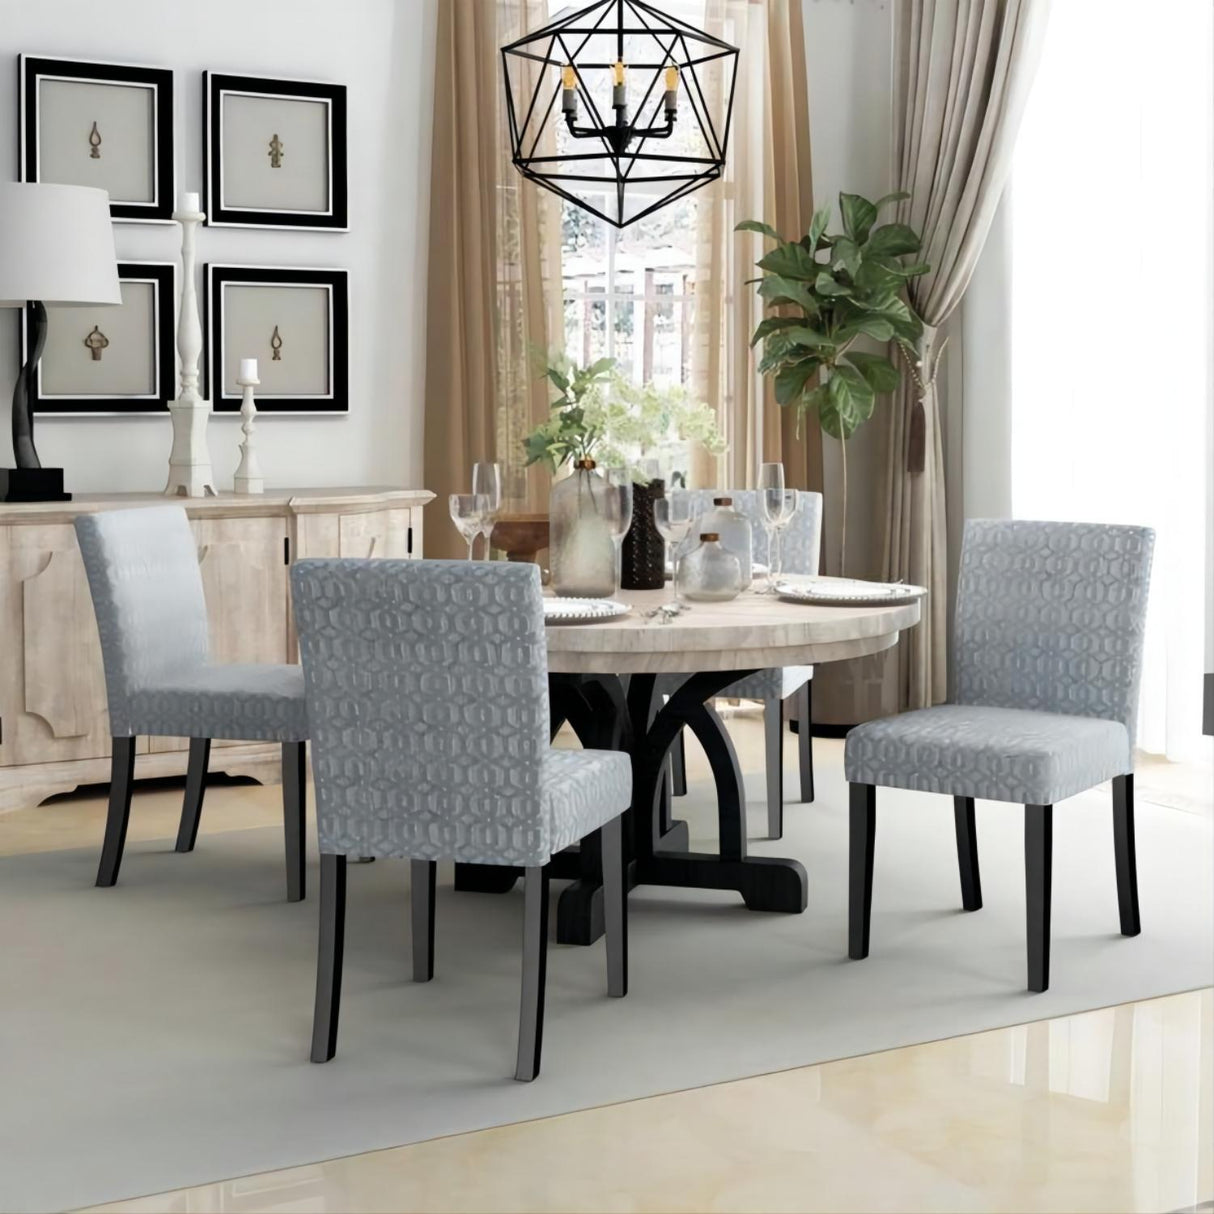 Upholstered Dining Chairs Set of 2 Modern Dining Chairs with Solid Wood Legs, Grey - Home Elegance USA